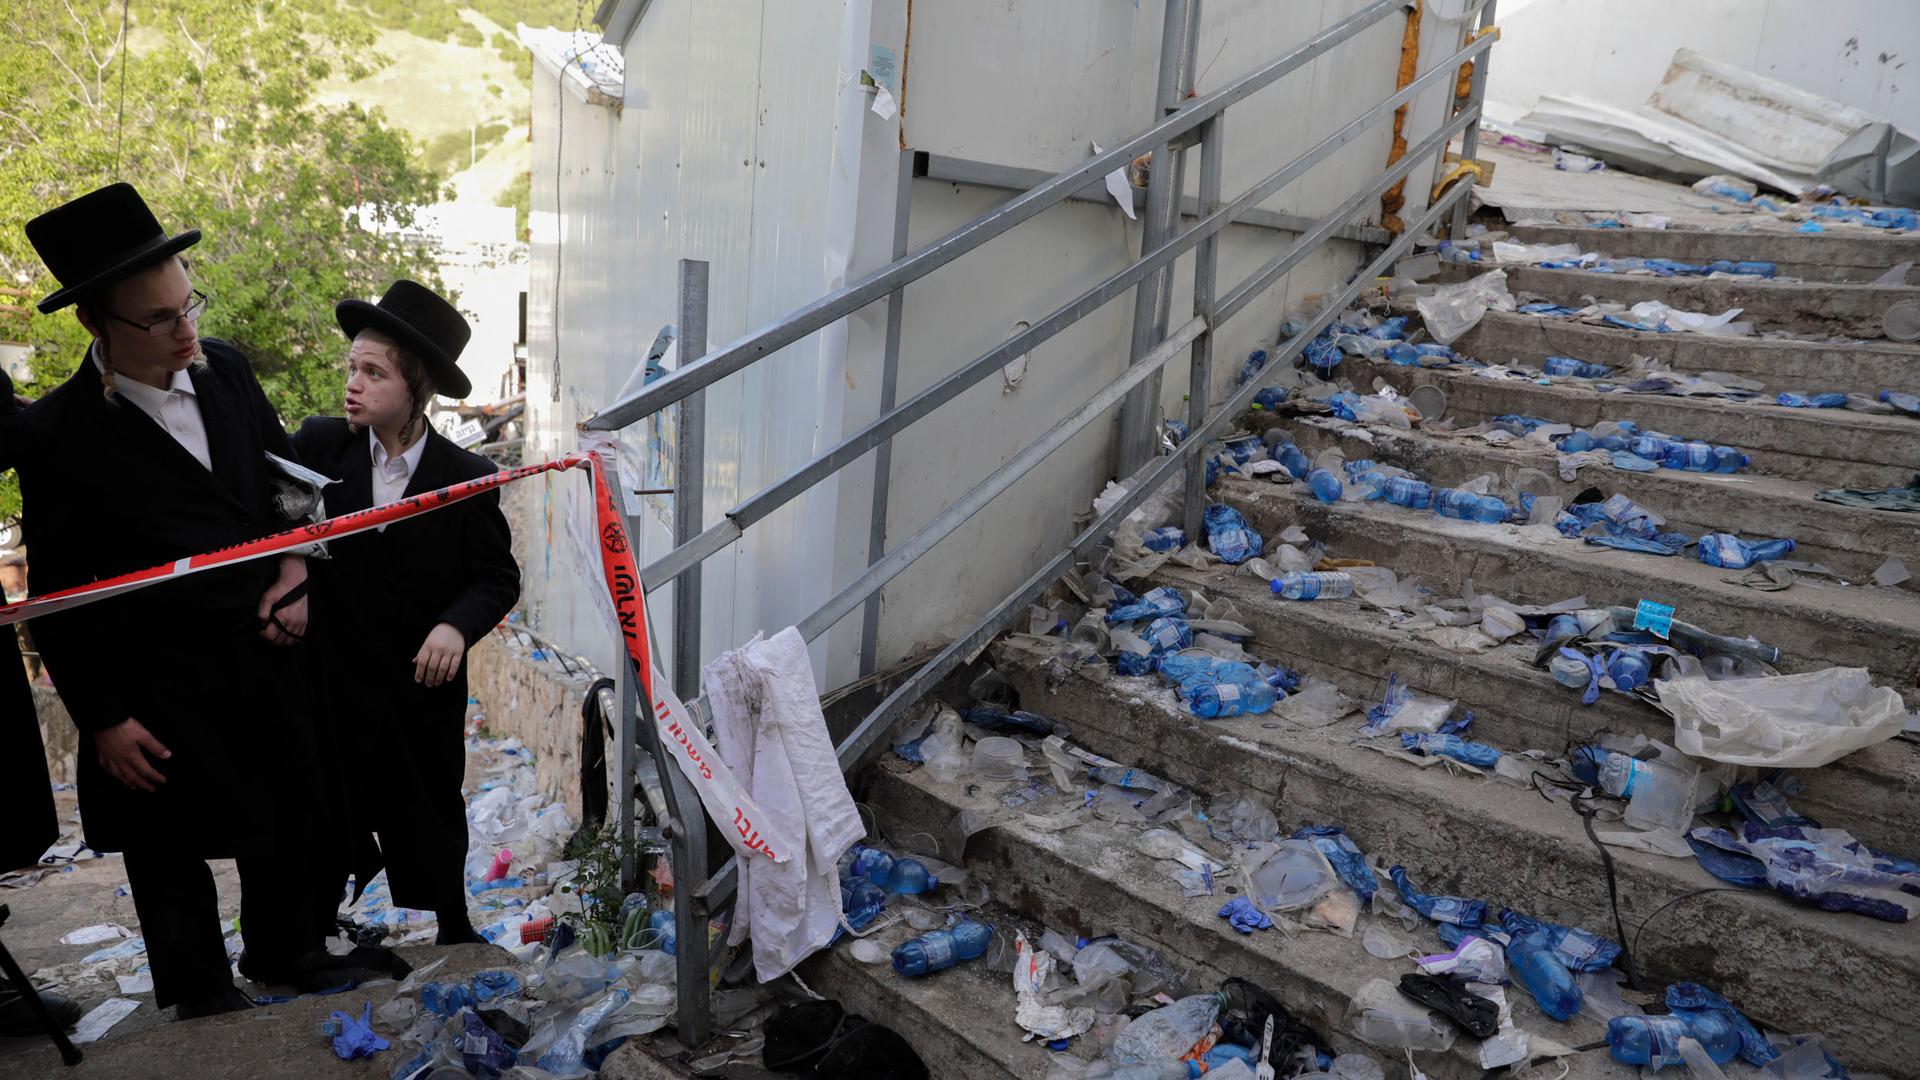 Two young Jewish men are shown wearing Ultra Orthodox clothing and looking on to a staircase strewn with debris following a stampede.